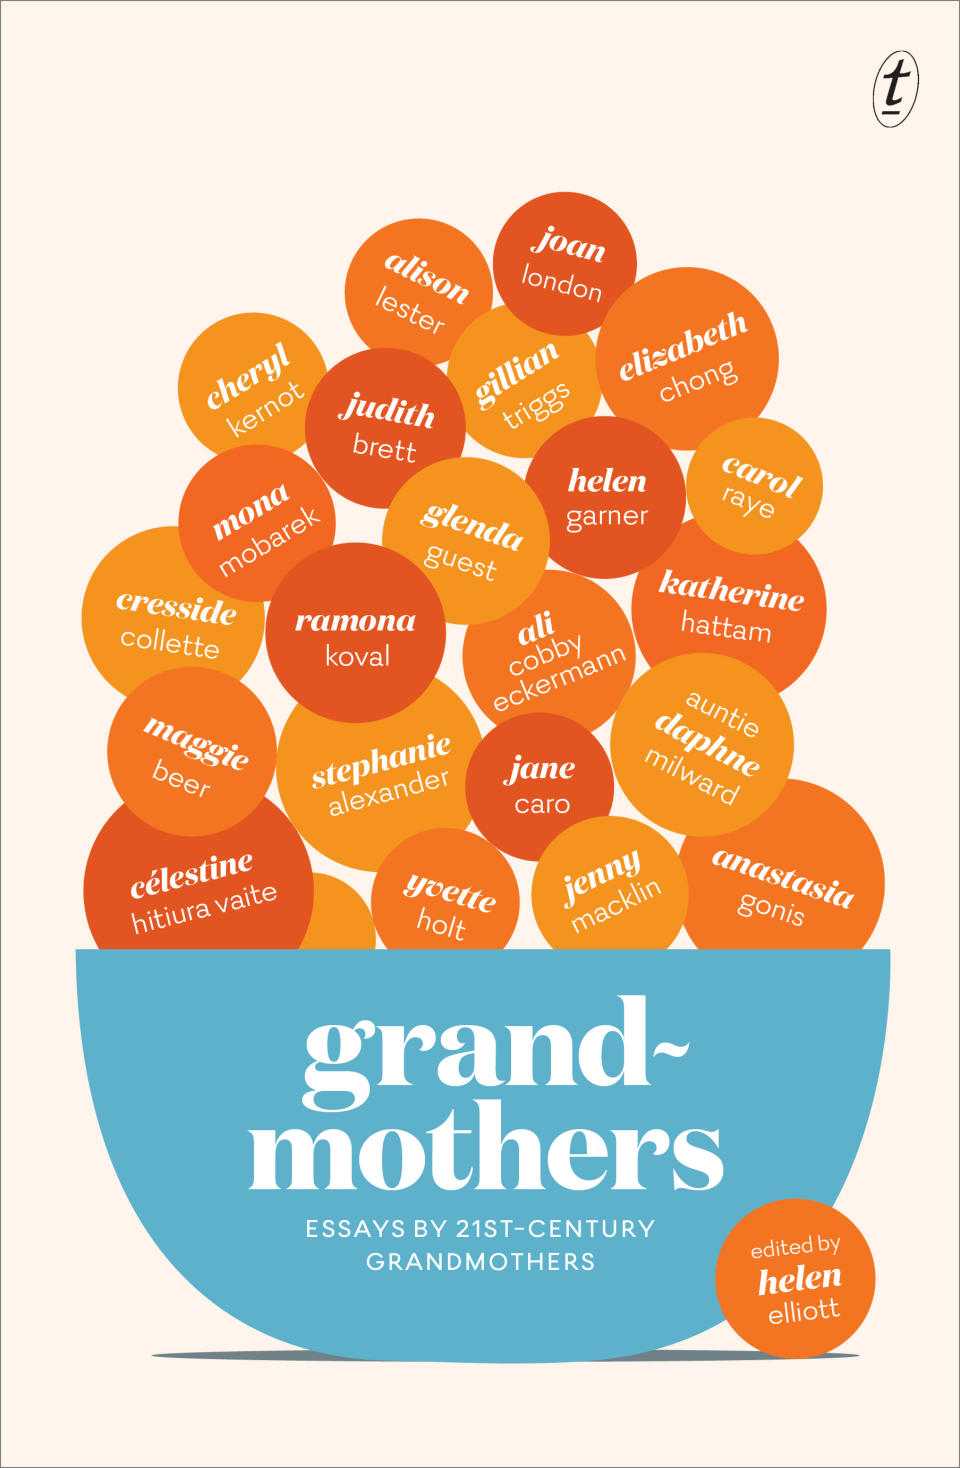 Grandmothers: Essays by 21st-Century Grandmothers anthology consists of a selection of essays by 24 Australian women about the many and varied aspects of being a granny. Photo: Text Publishing Co